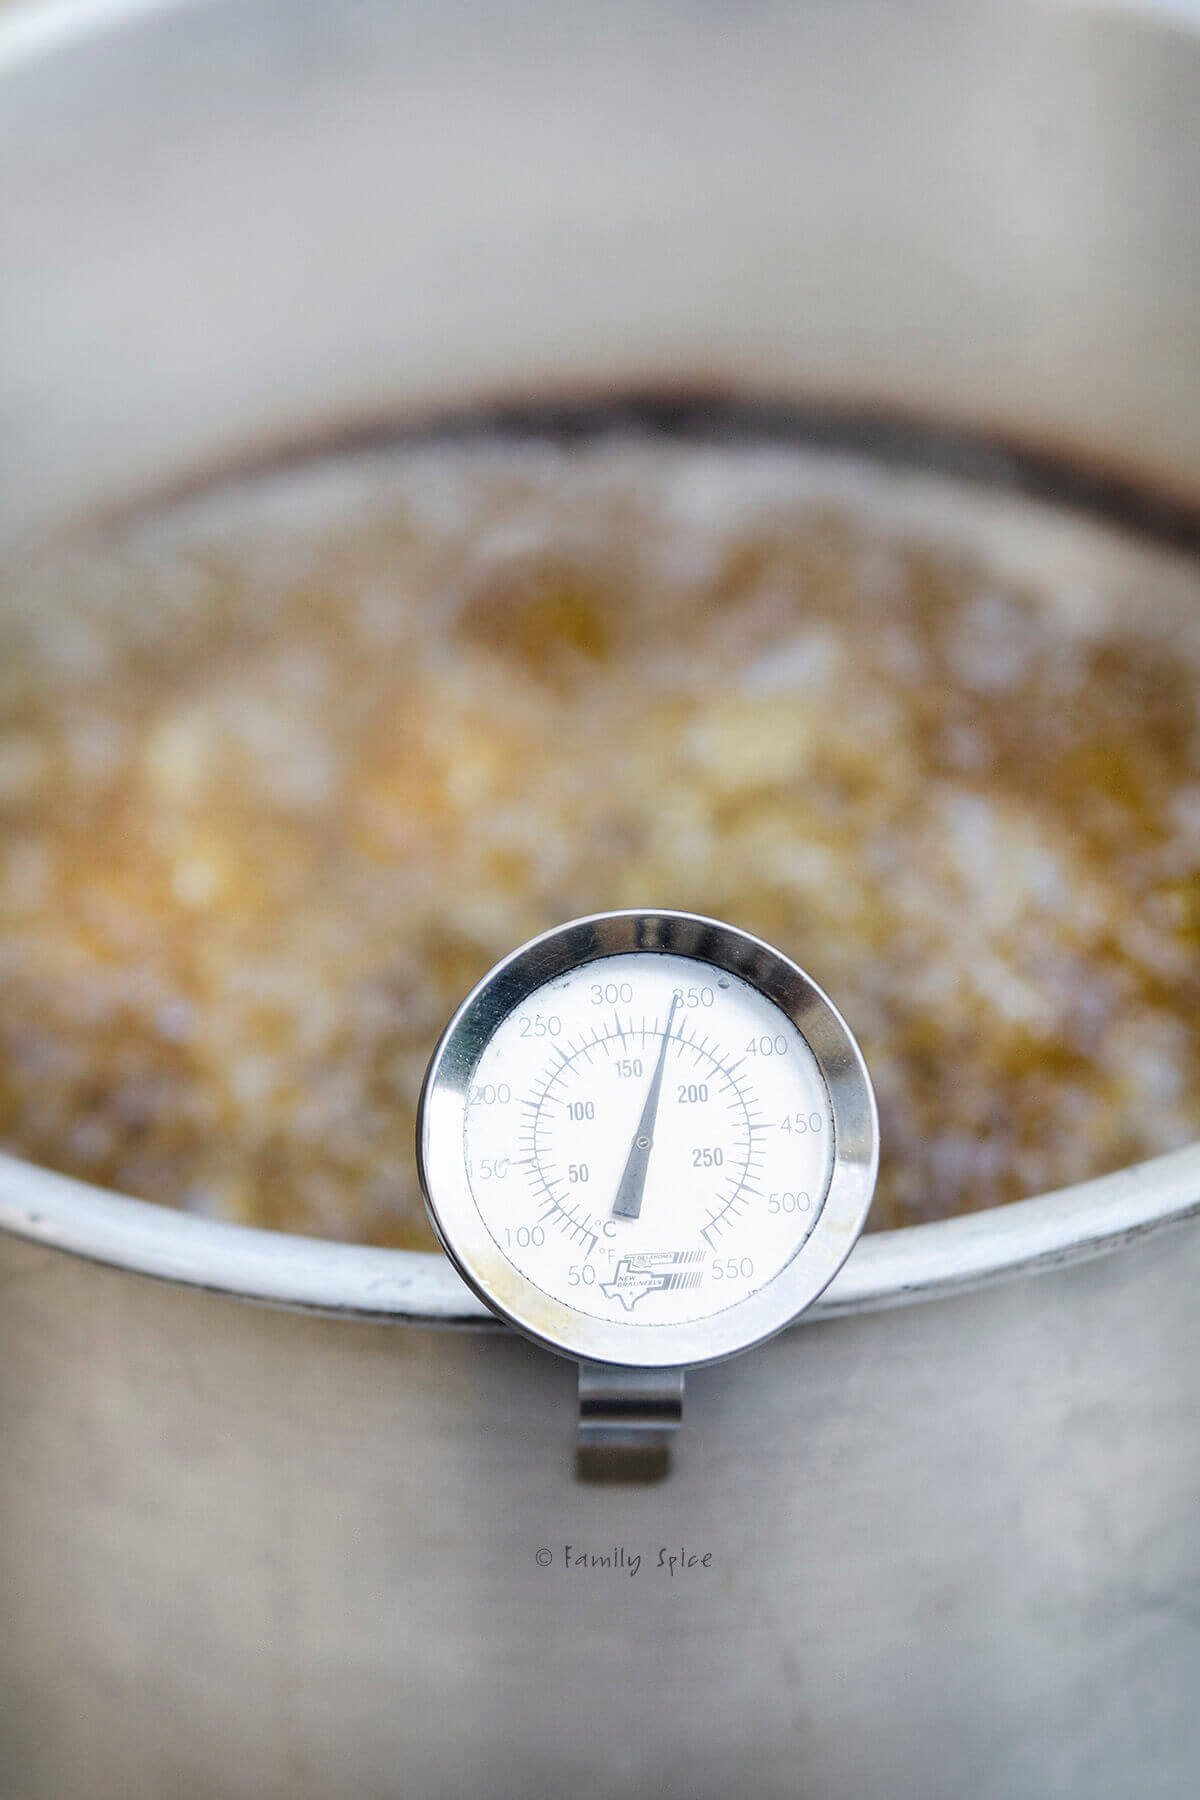 Closeup of a large pot with hot oil in it and thermometer attached